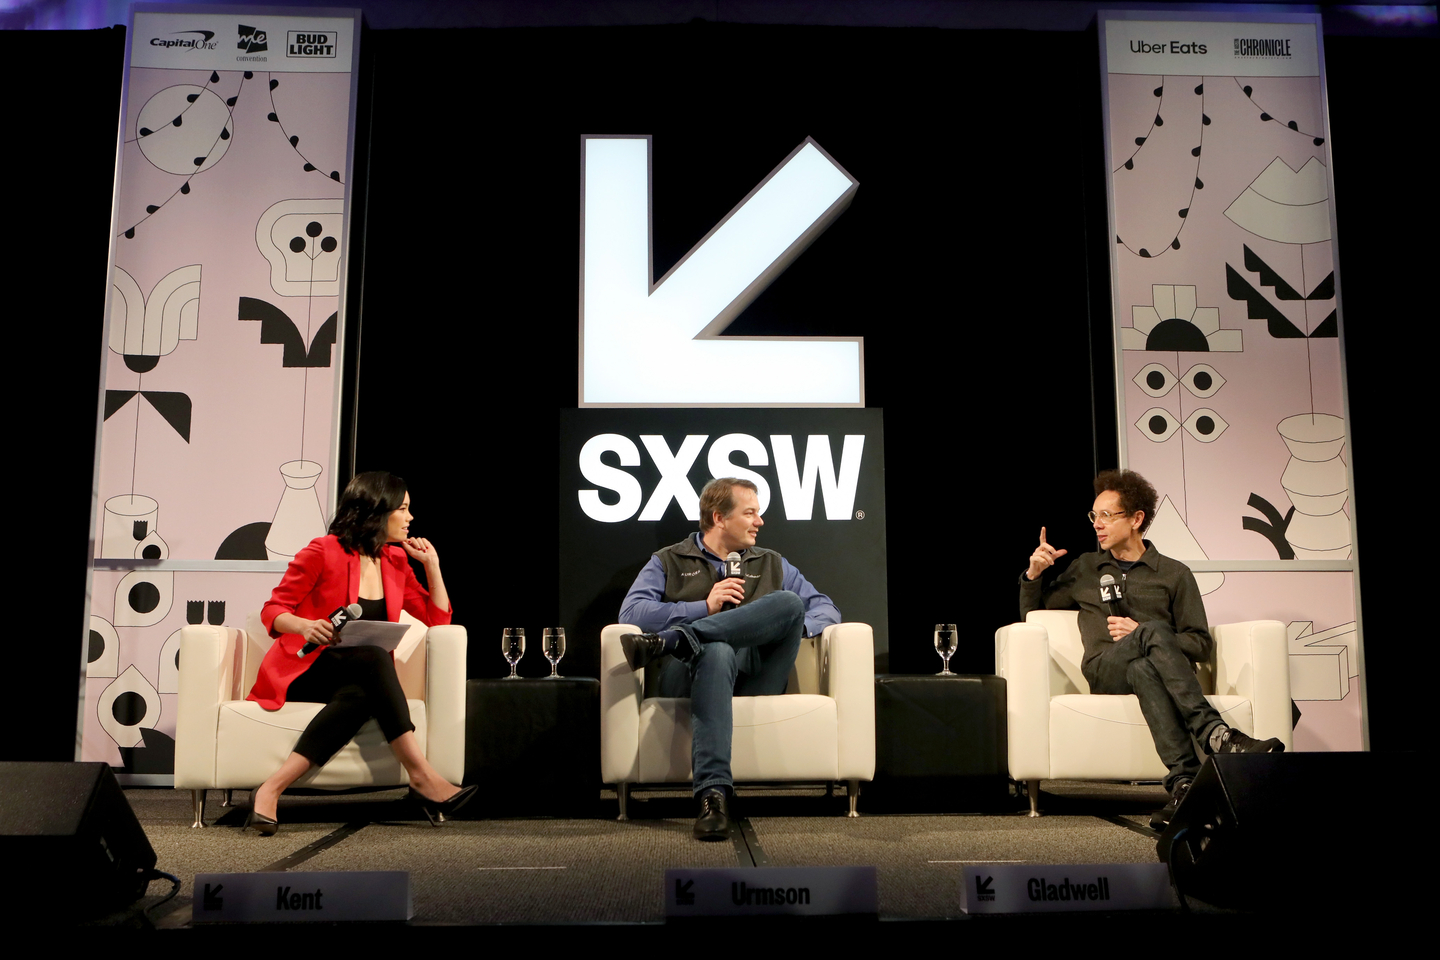 (L-R) Jo Ling Kent, Chris Urmson, and Malcolm Gladwell at the Self-Driving Cars: The Future is When? Featured Session – Photo by Samantha Burkardt/Getty Images for SXSW